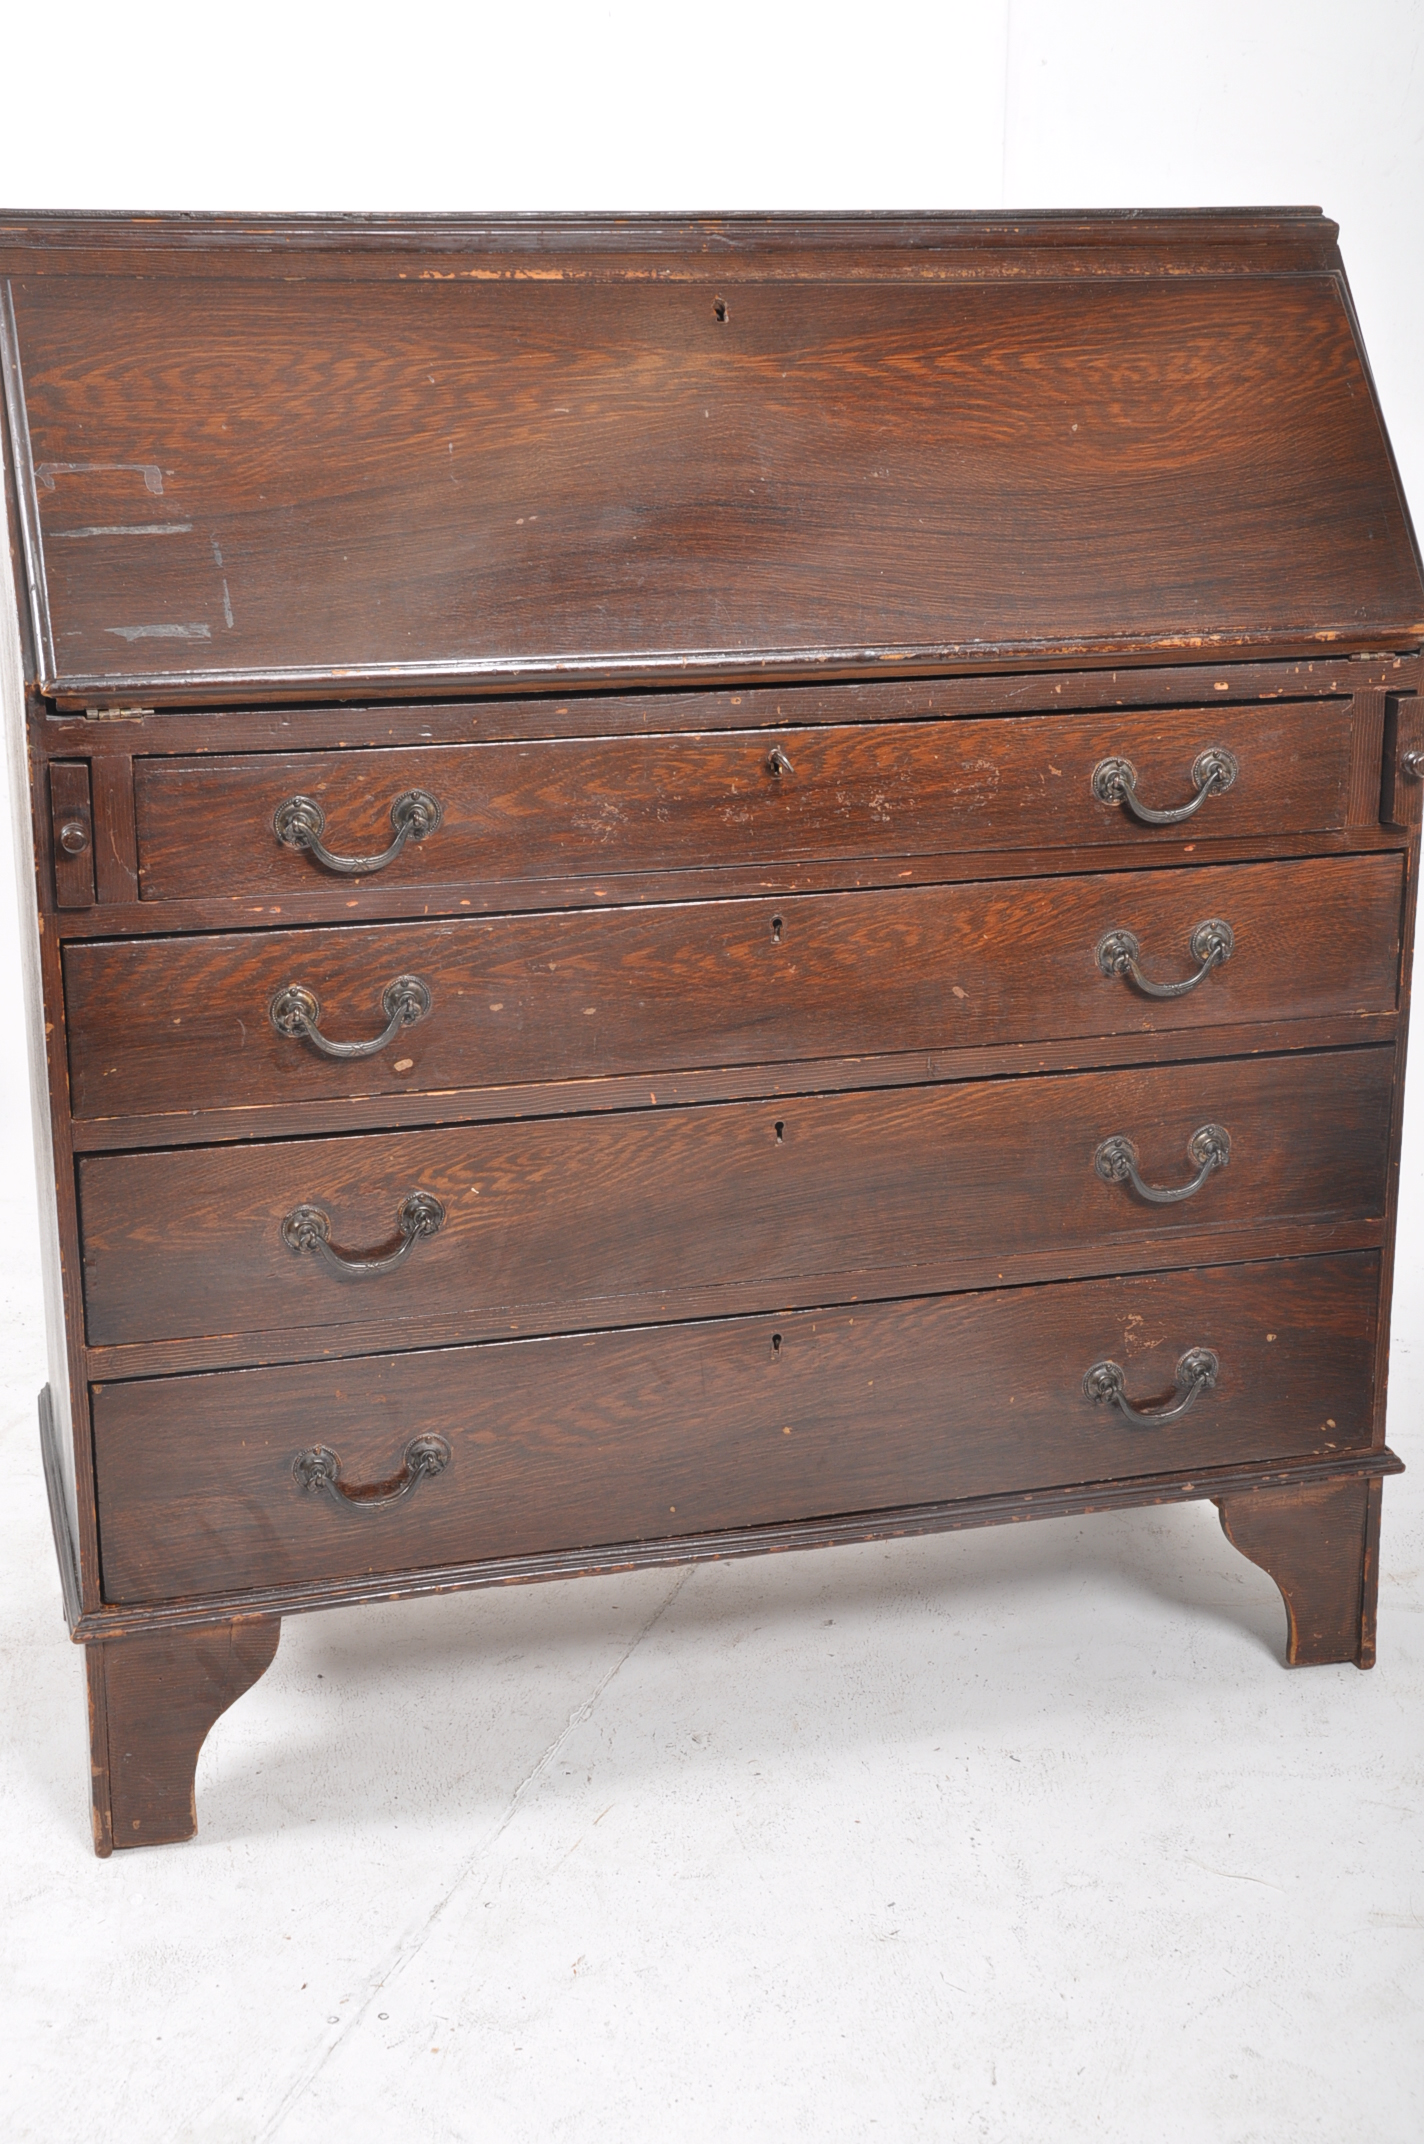 A 1930's carved oak bureau. A series of drawers beneath fall front slope atop having appointed